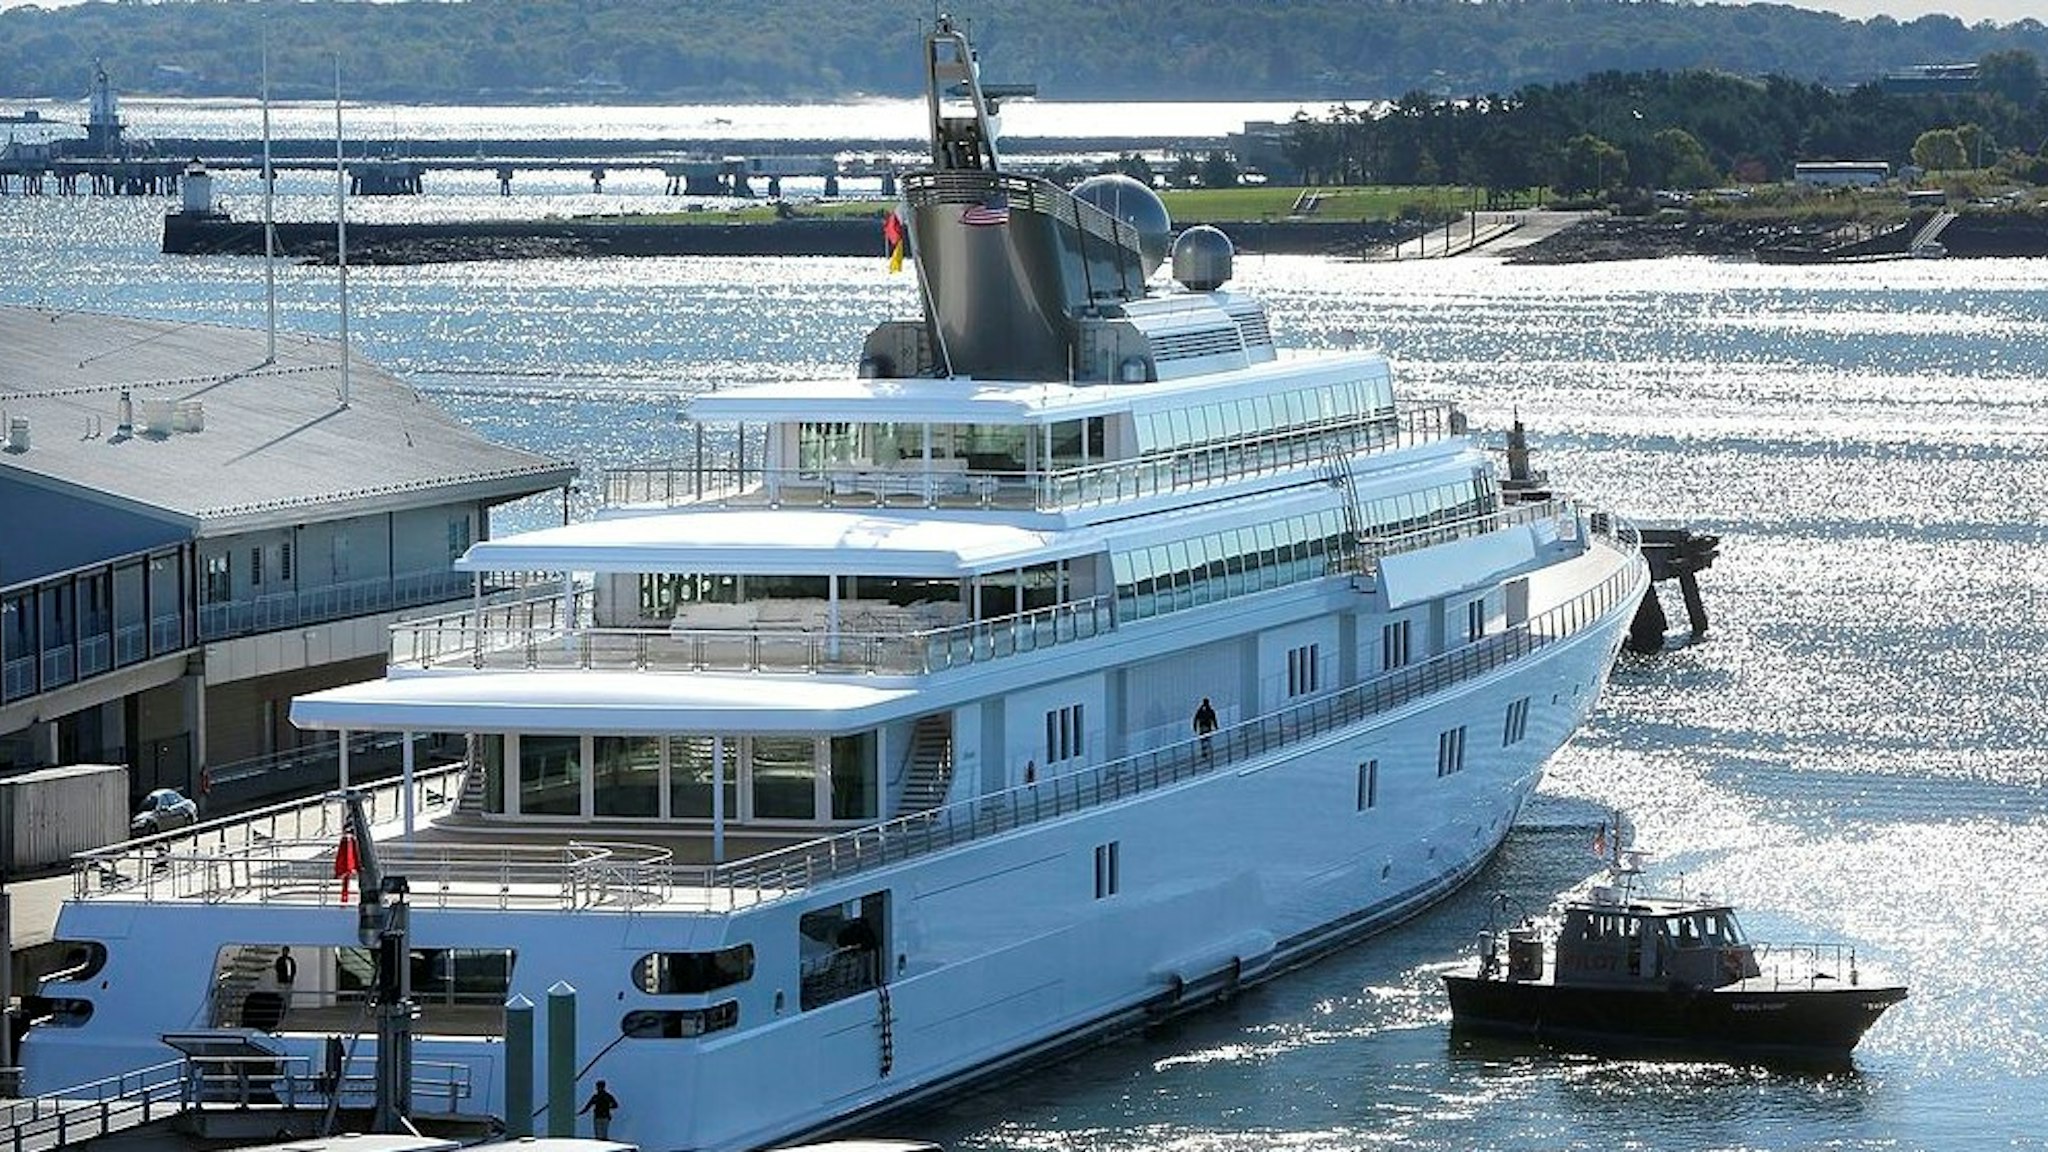 David Geffen's yacht Rising Sun came into Portland on Tuesday morning, September 24, 2013. (Photo by